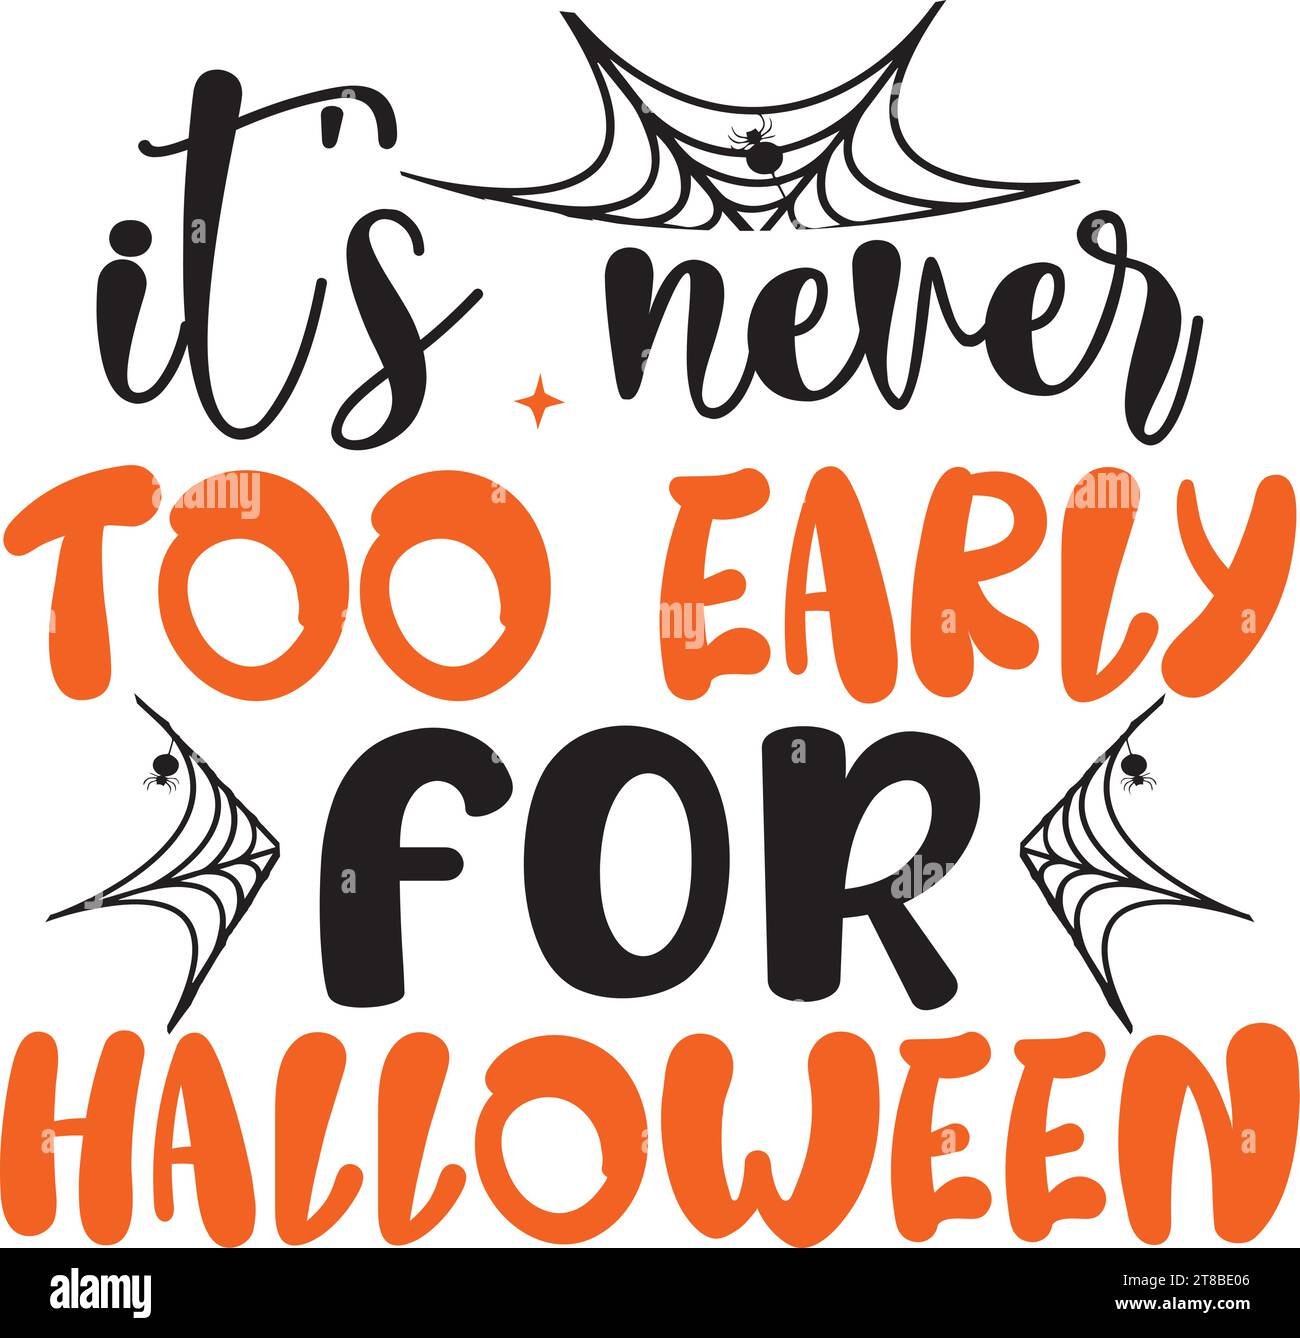 It's Never Too Early for Halloween Stock Vector